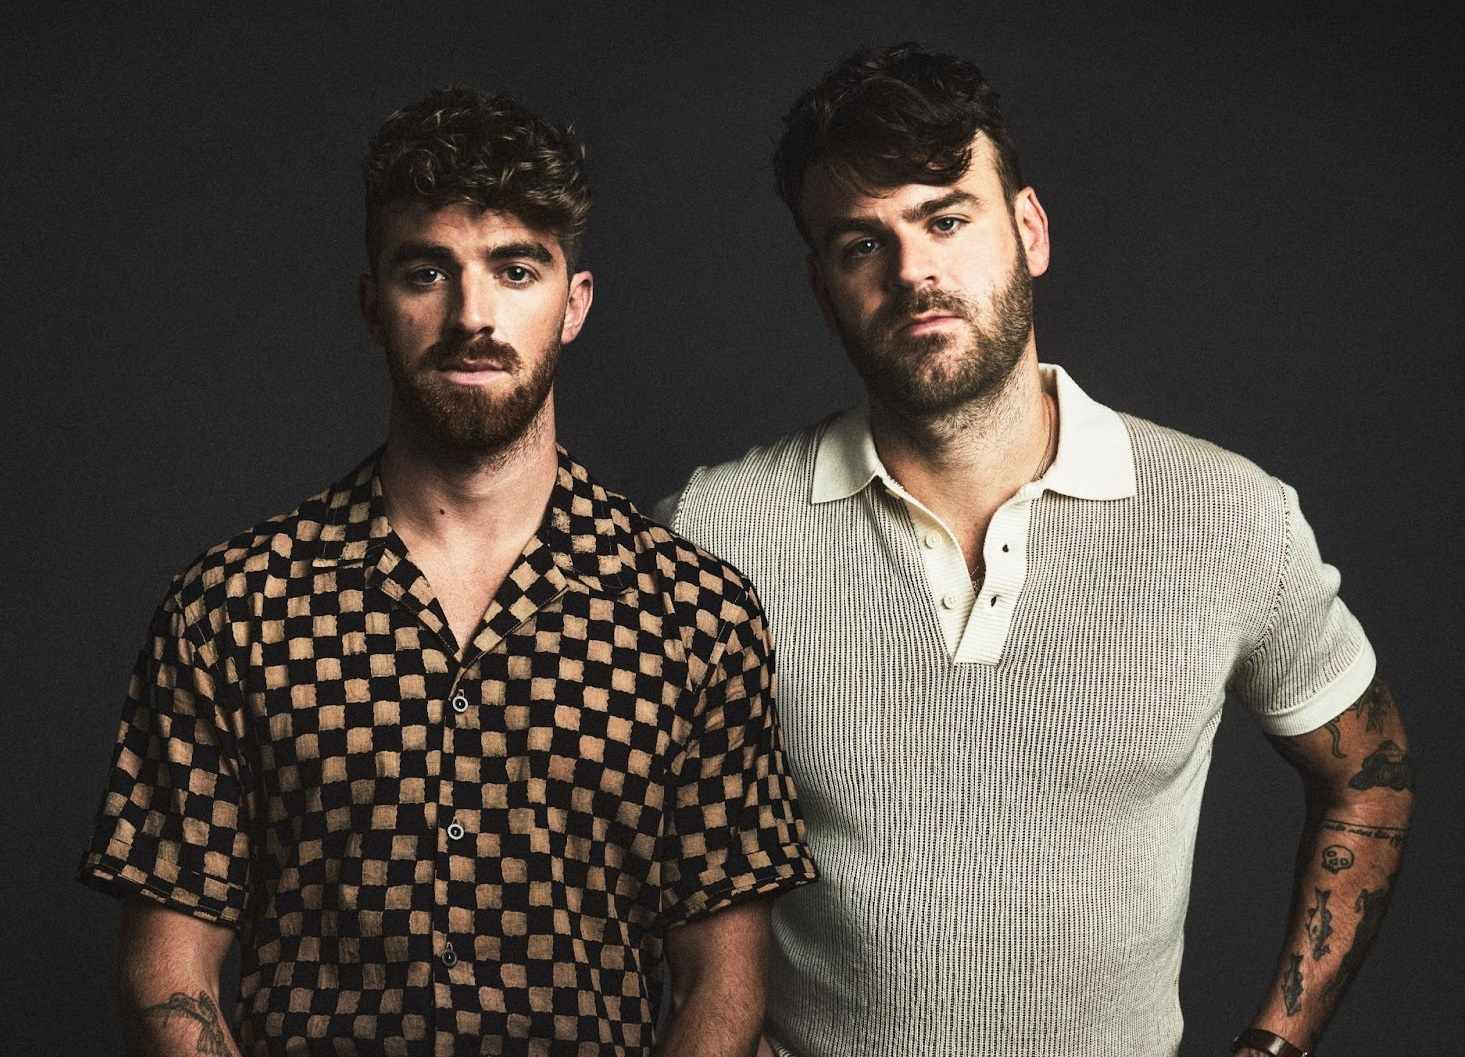 Summertime Friends - Album by The Chainsmokers